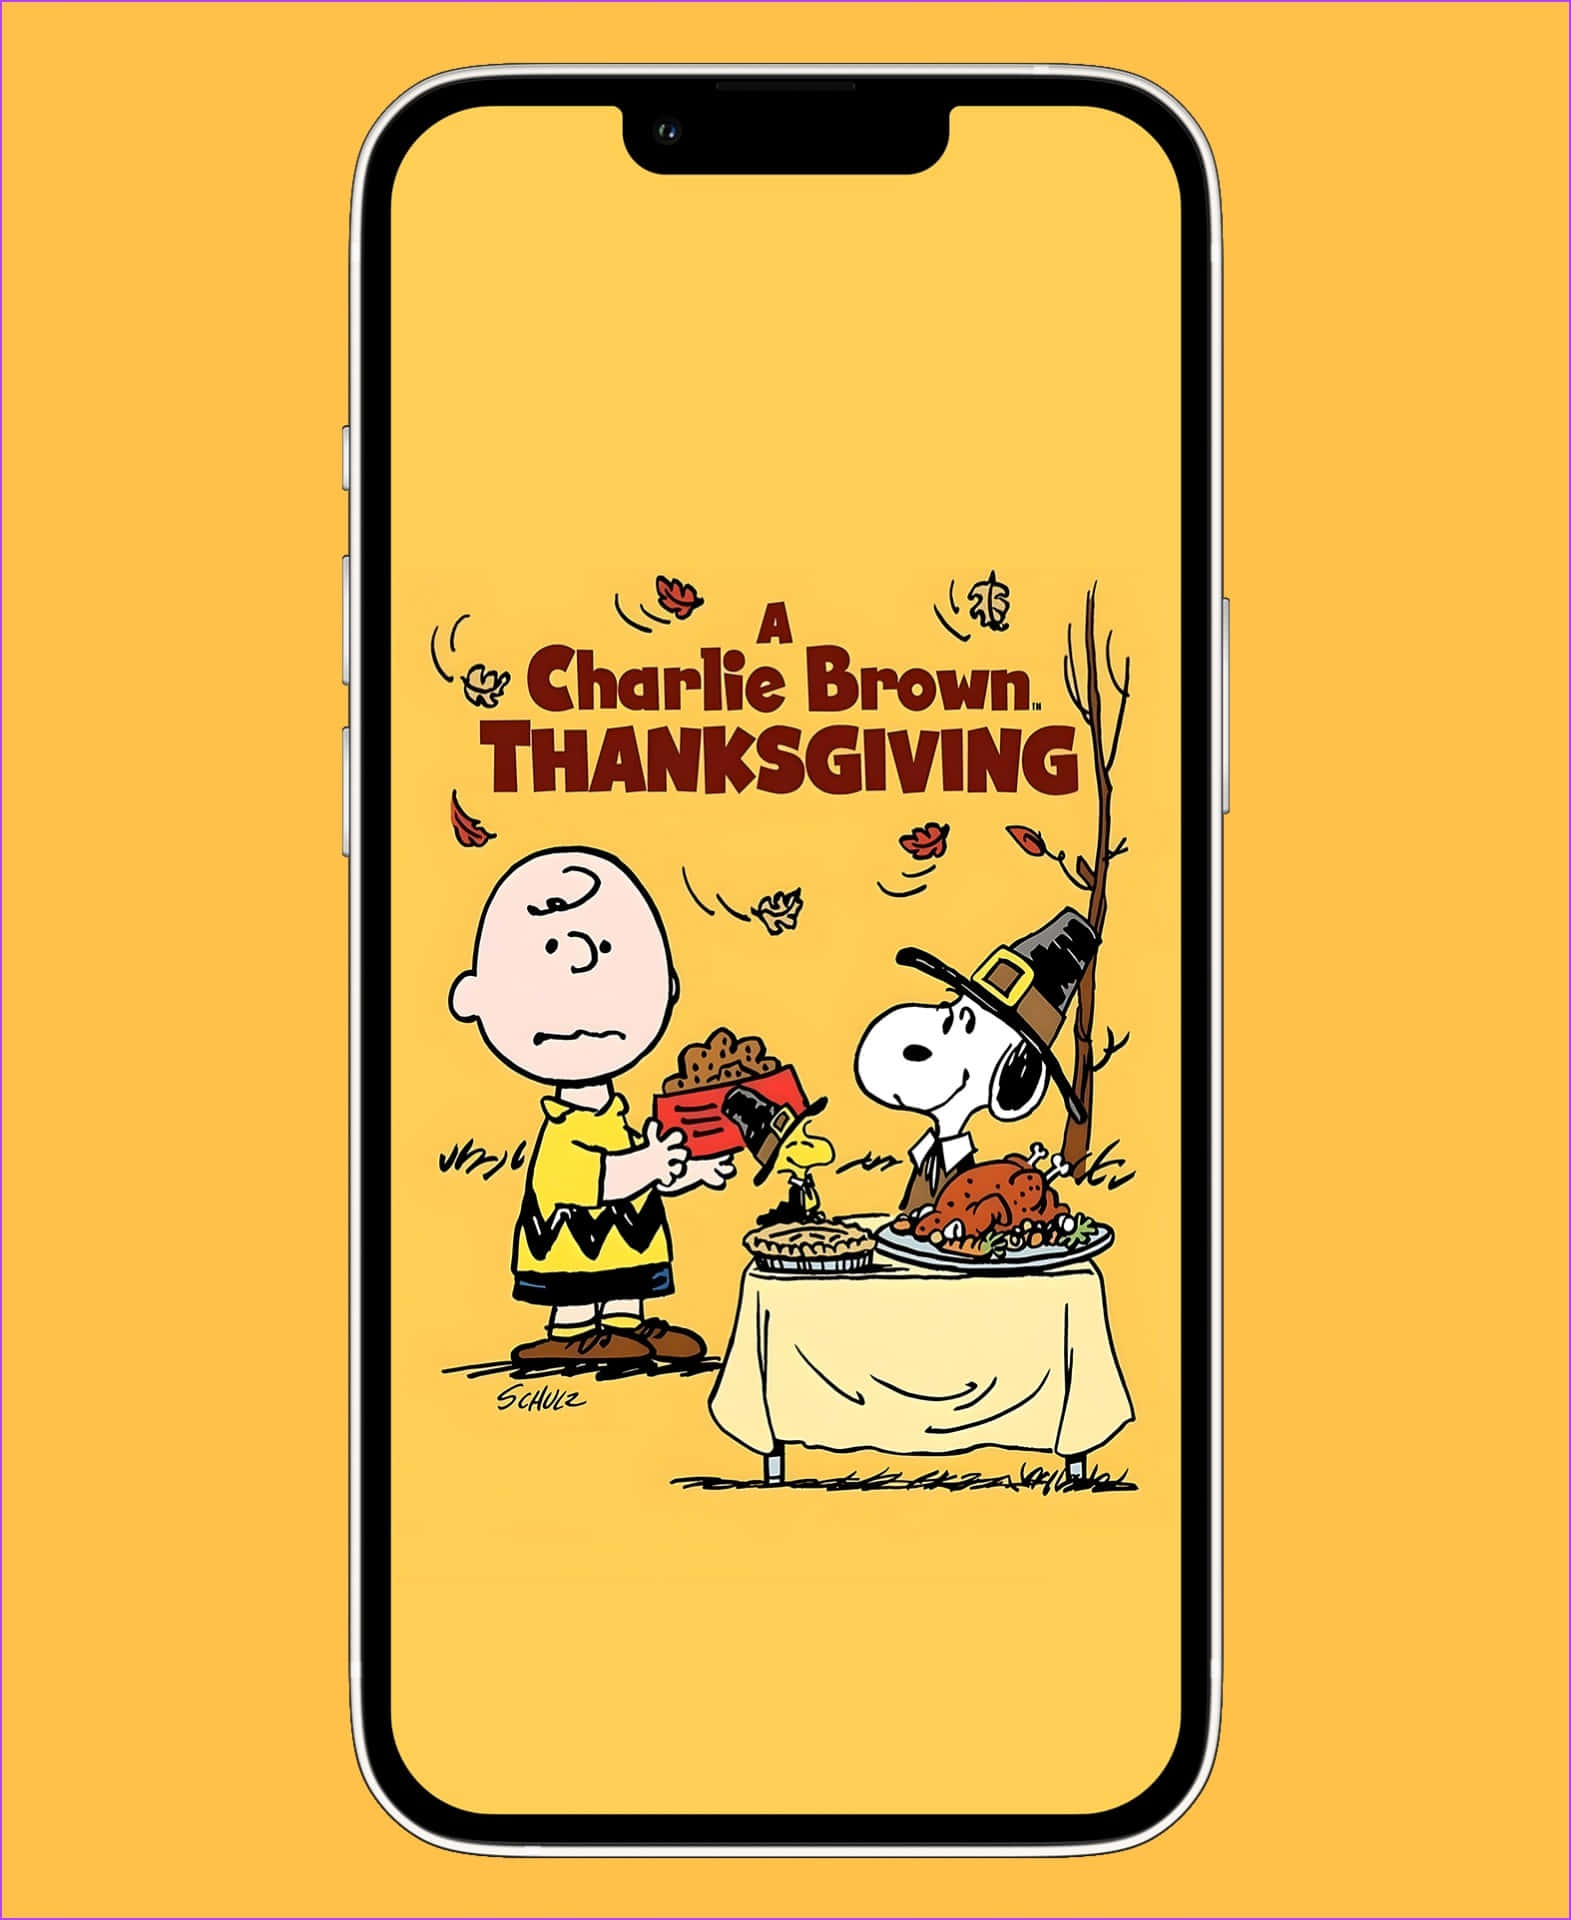 Charlie Brown&The Gang Celebrate a Thanksgiving Feast Wallpaper